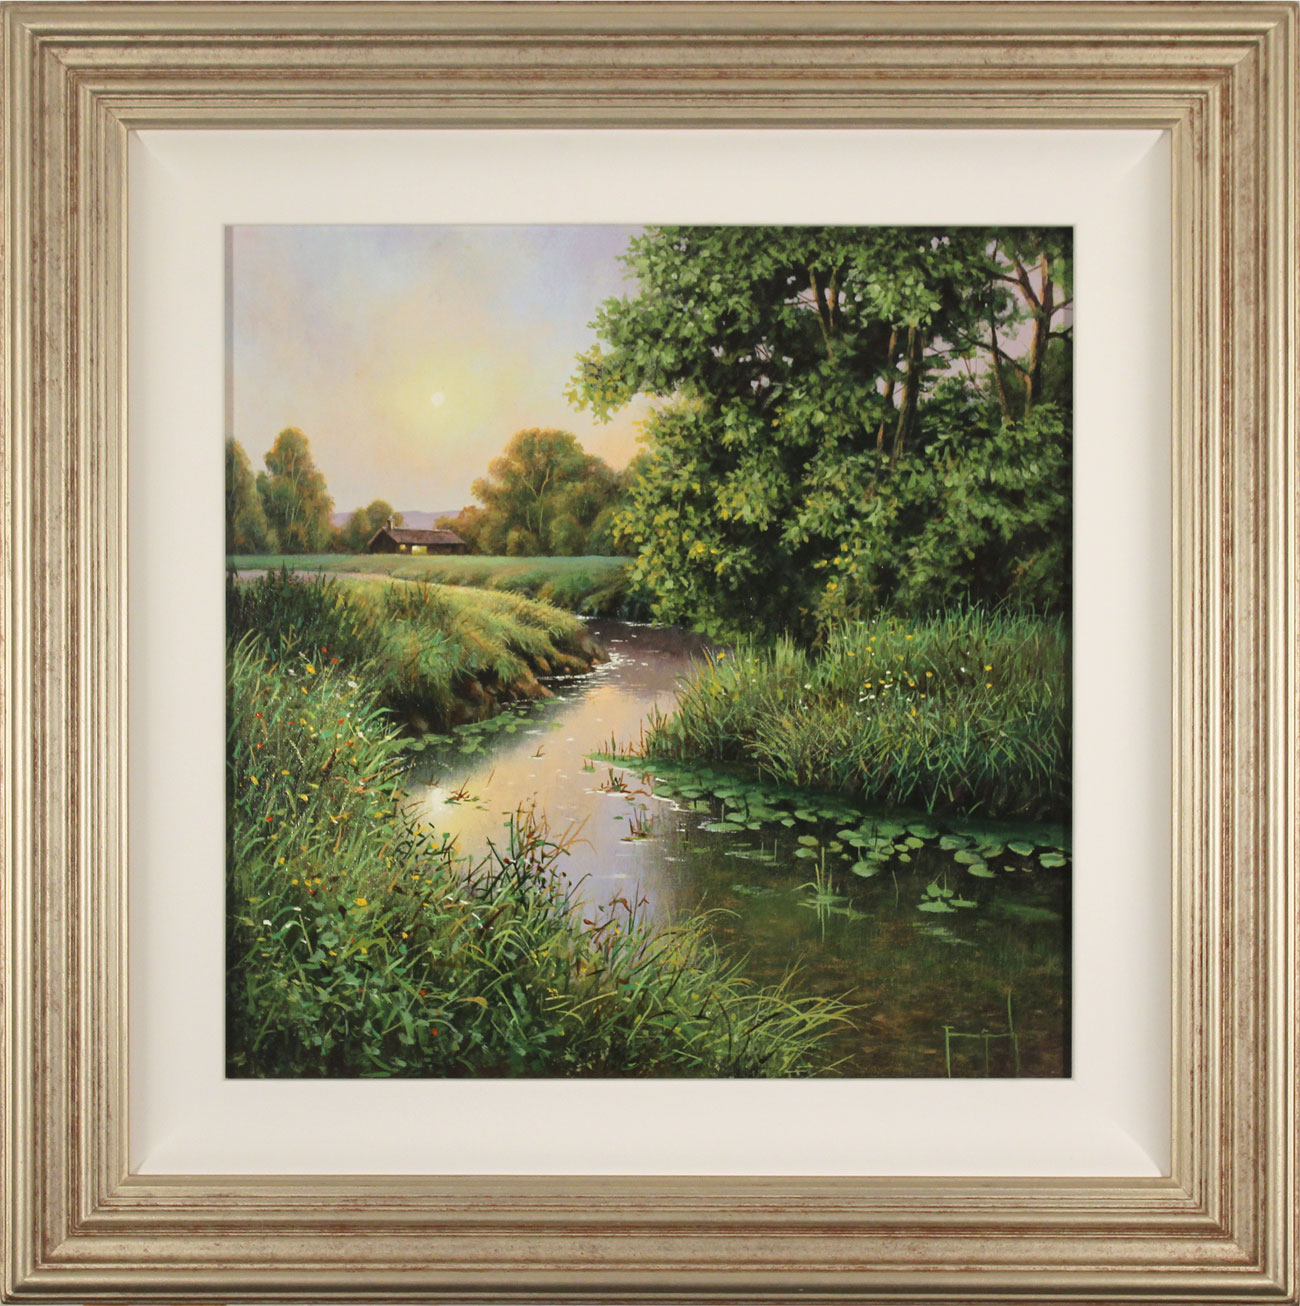 Terry Grundy, Original oil painting on panel, Evening Light, click to enlarge